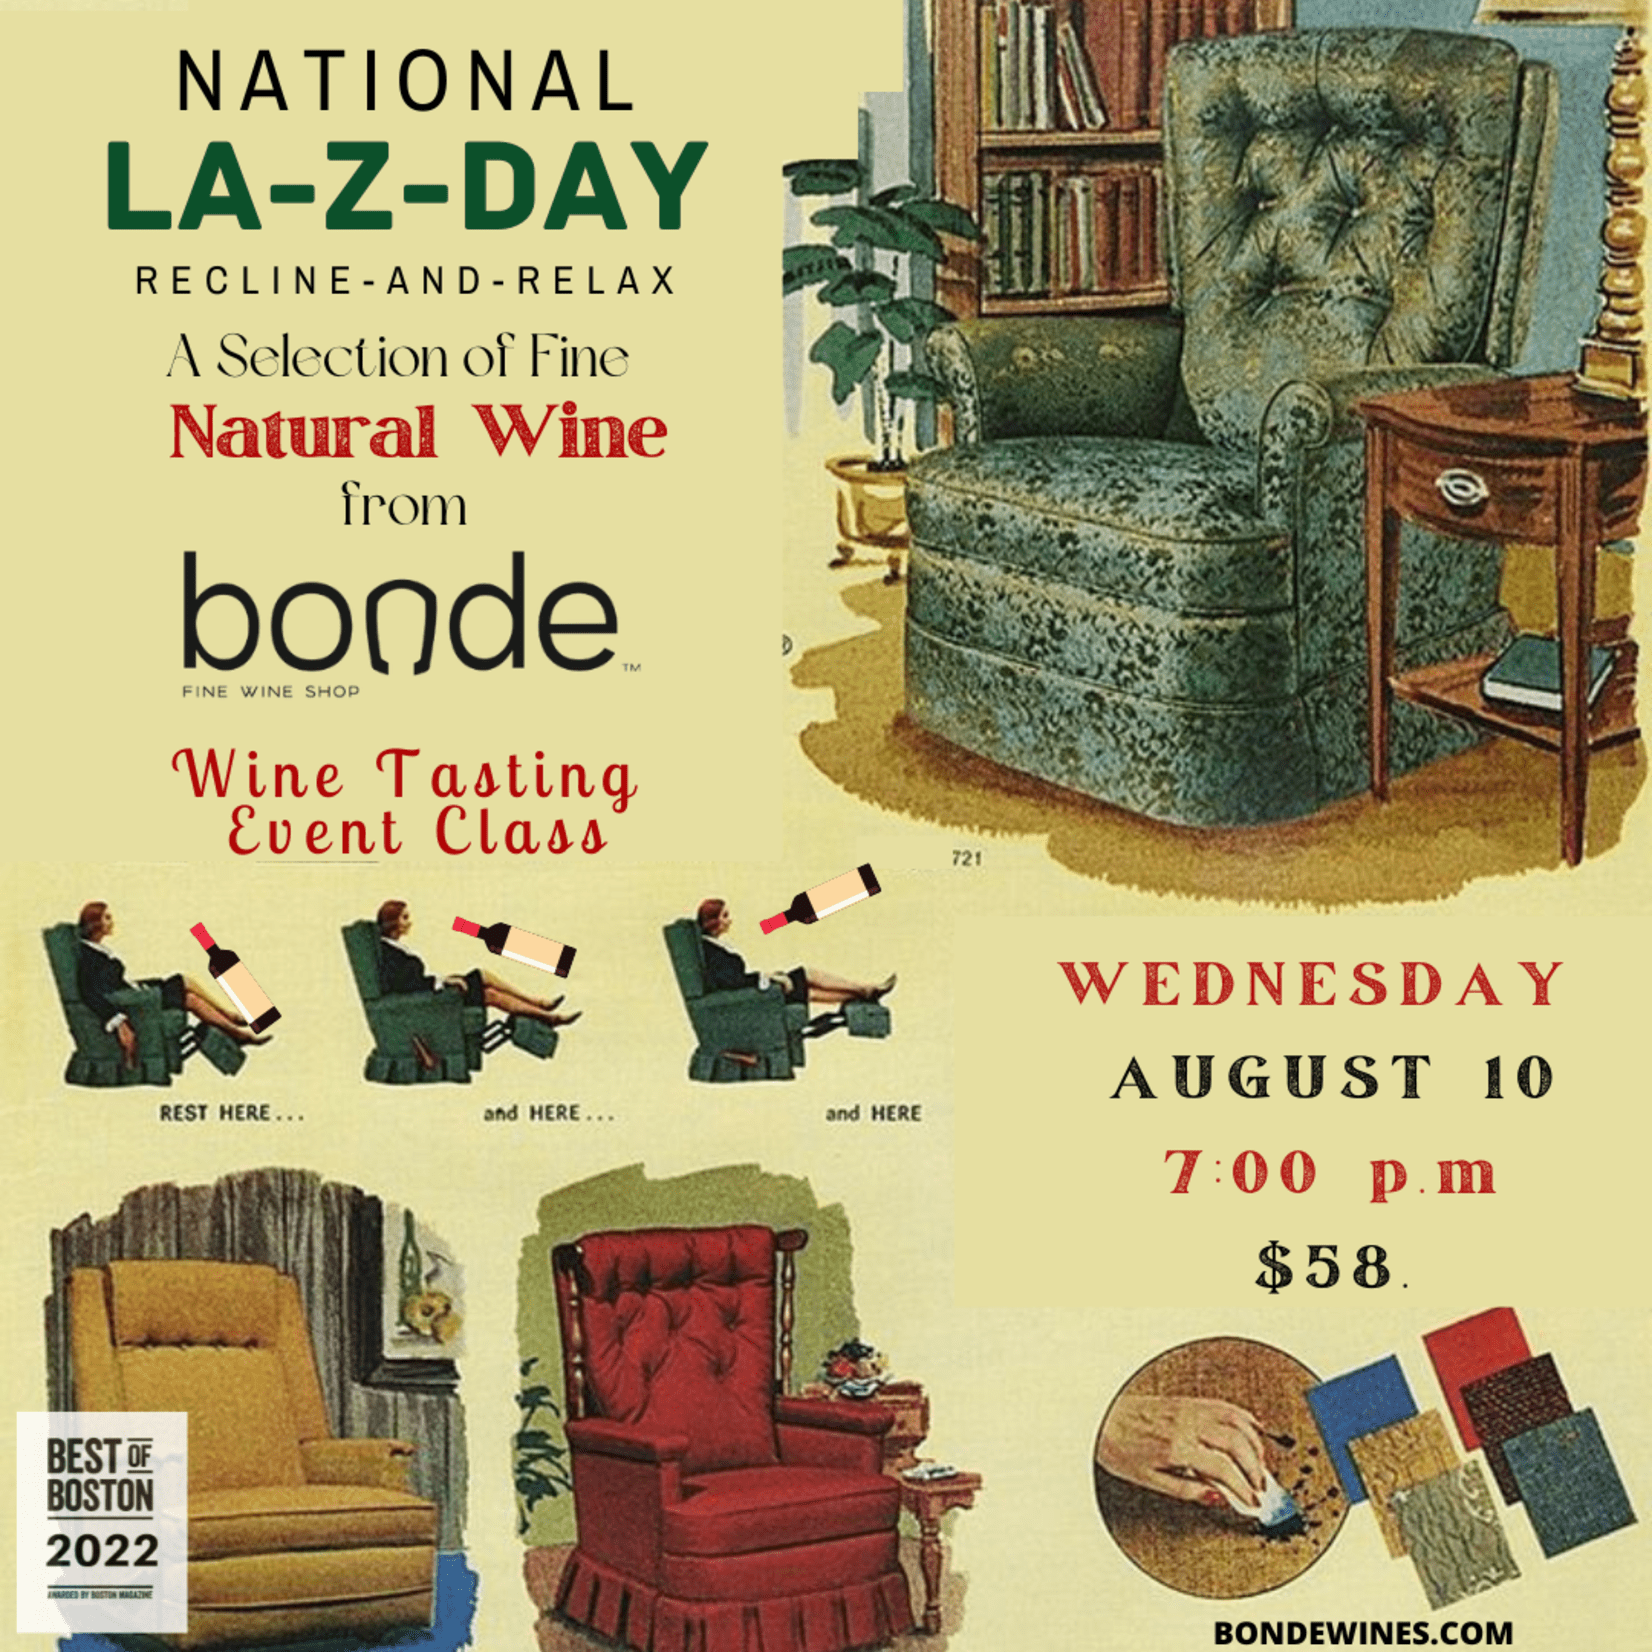 Wine Tasting - National Lazy Day: Natural Wine - Wednesday, August 10 - 7:00 p.m.